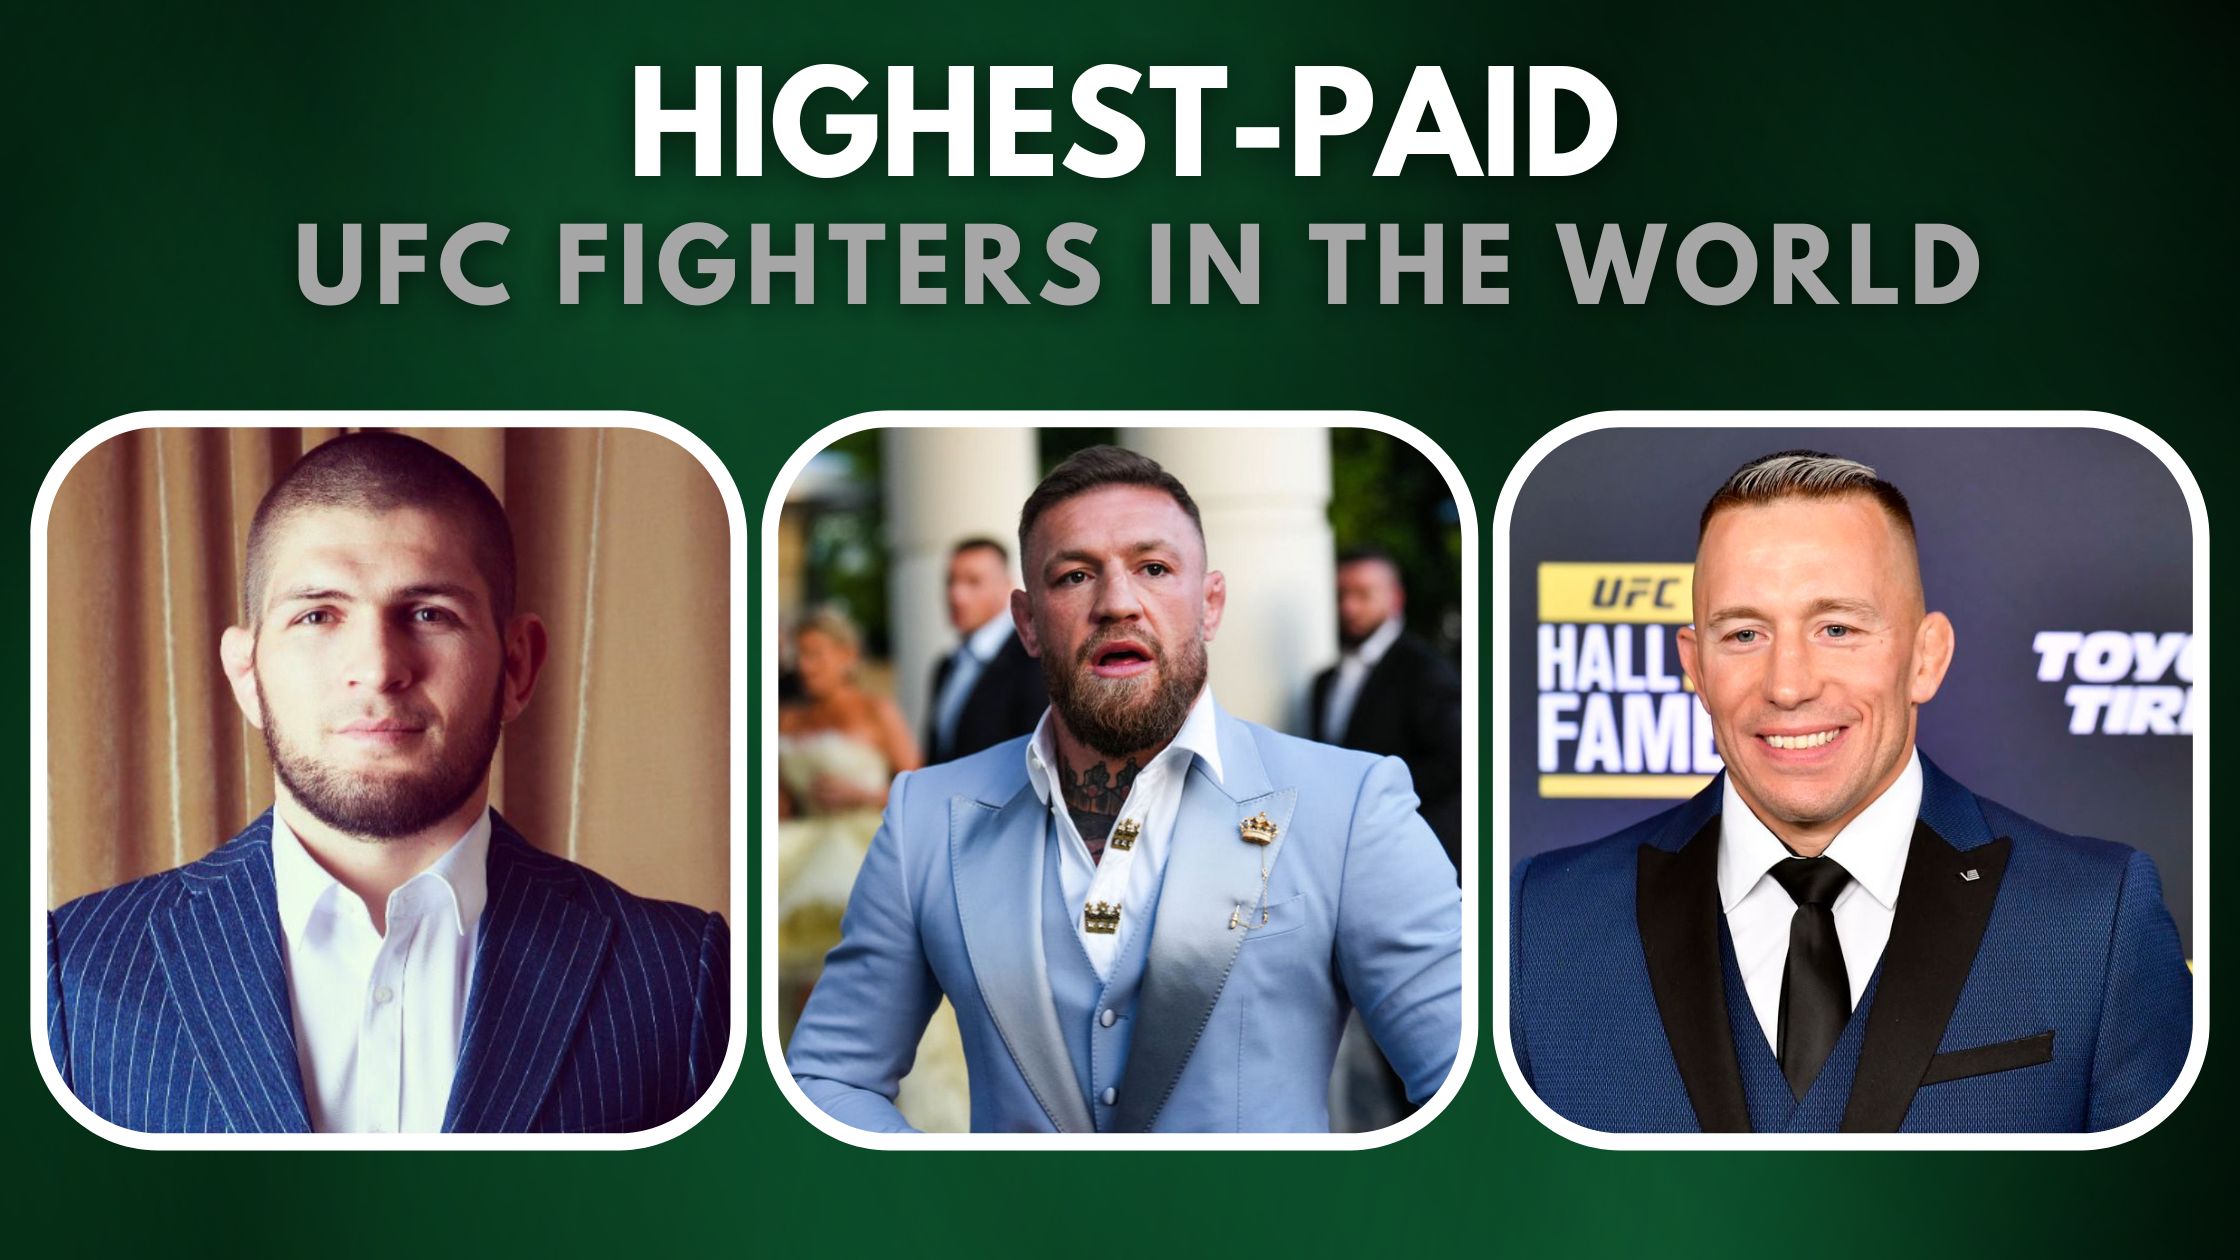 Top 10 Highest-Paid UFC Fighters in The World